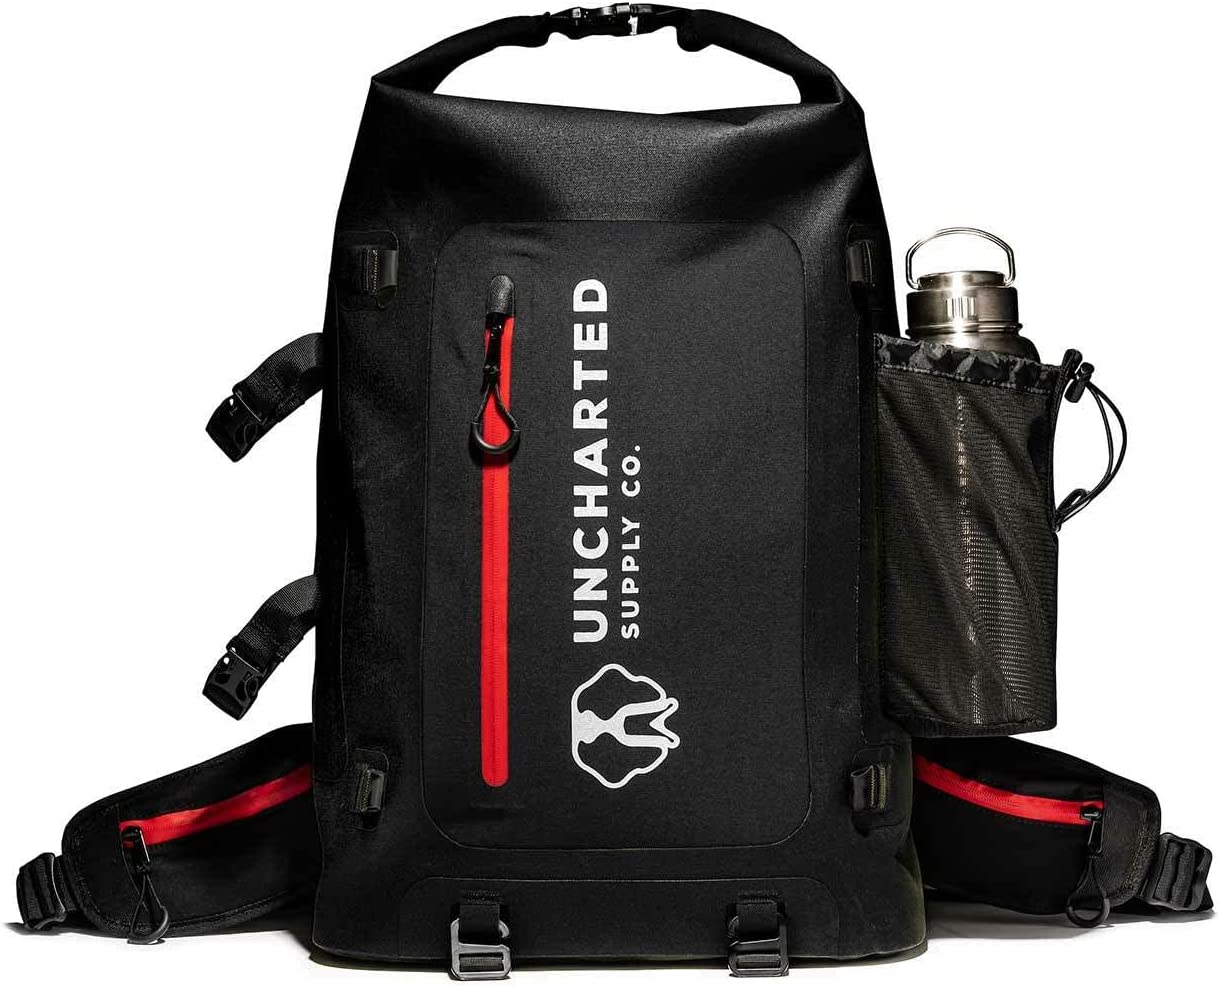 Uncharted Supply Co The Seventy2 Pro 2-Person Survival System – 72 Hour Emergency Preparedness Kit – Ideal for Your Car, Home, Survival Readiness, and Camping